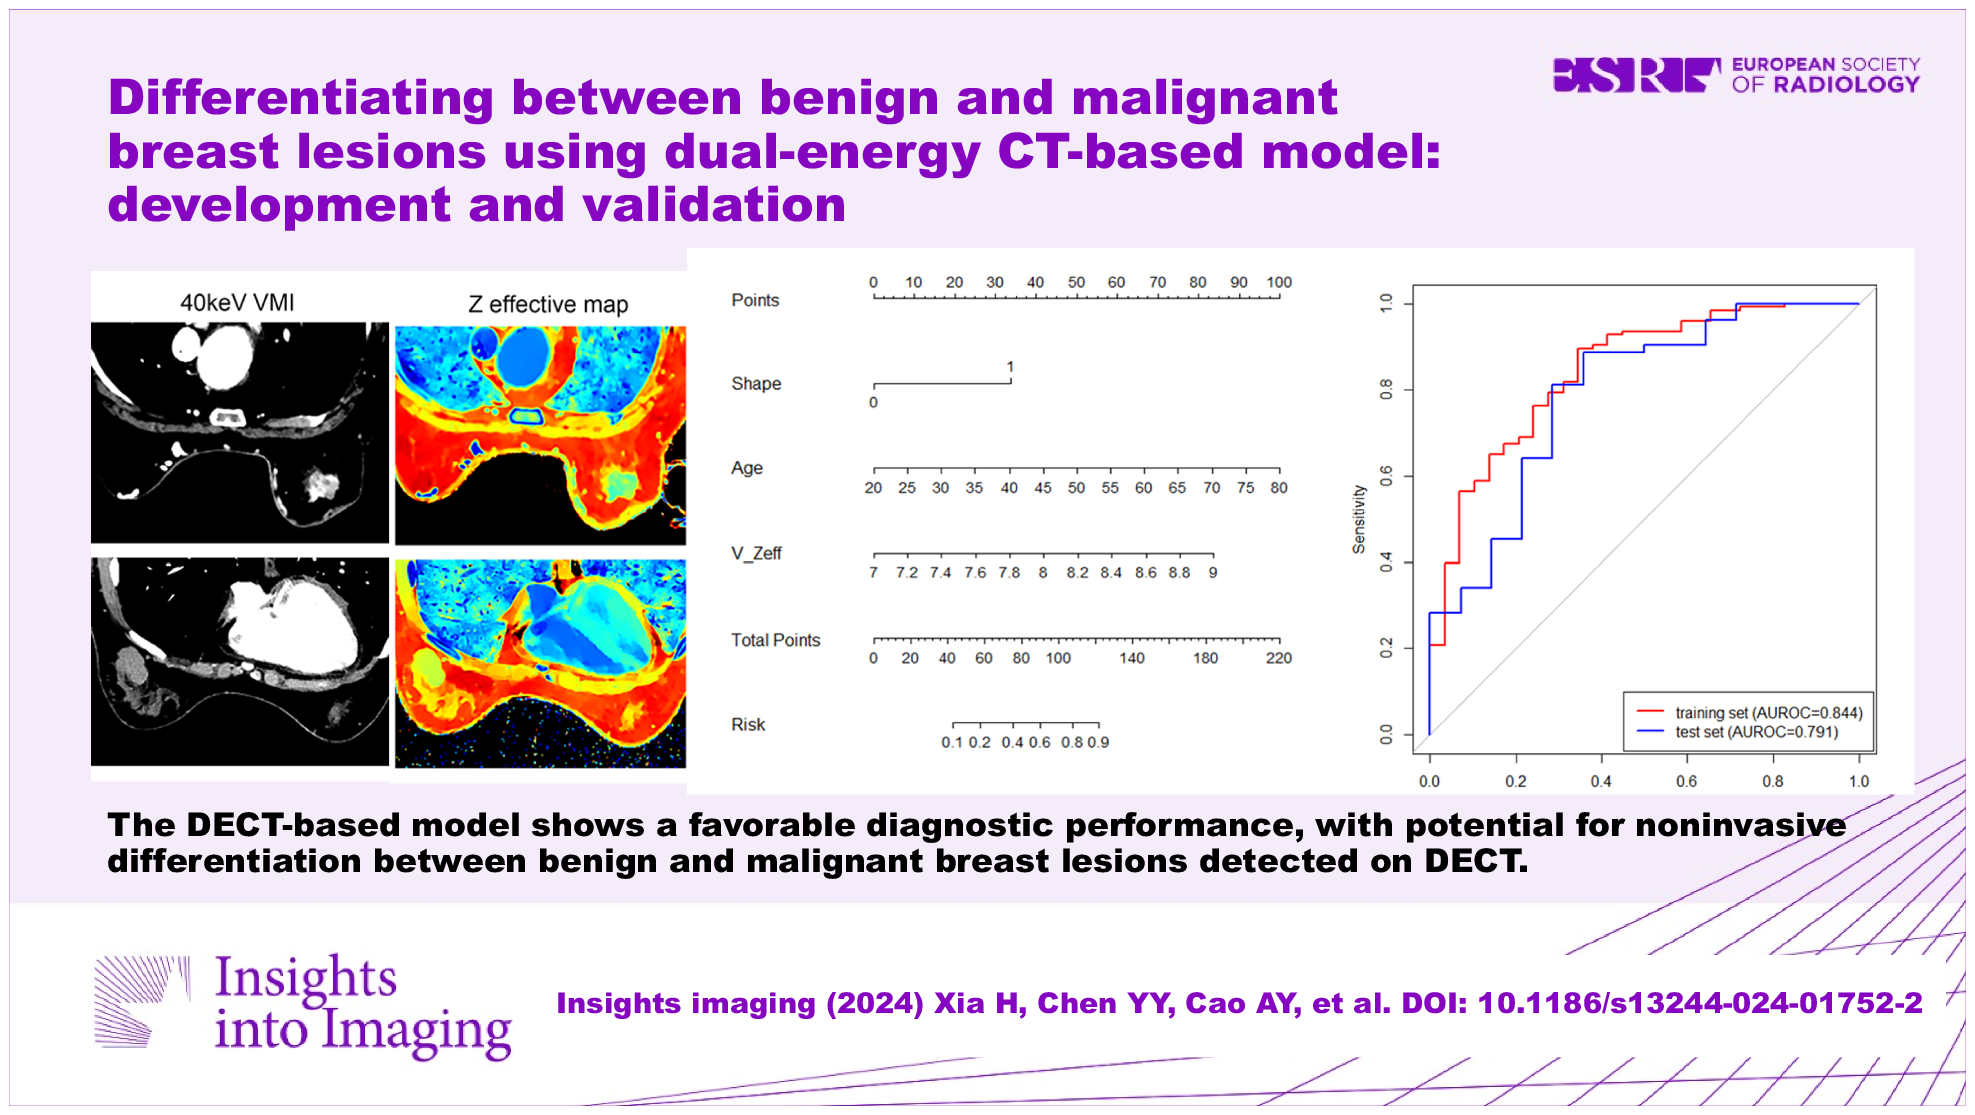 Differentiating between benign and malignant breast lesions using dual-energy CT-based model: development and validation